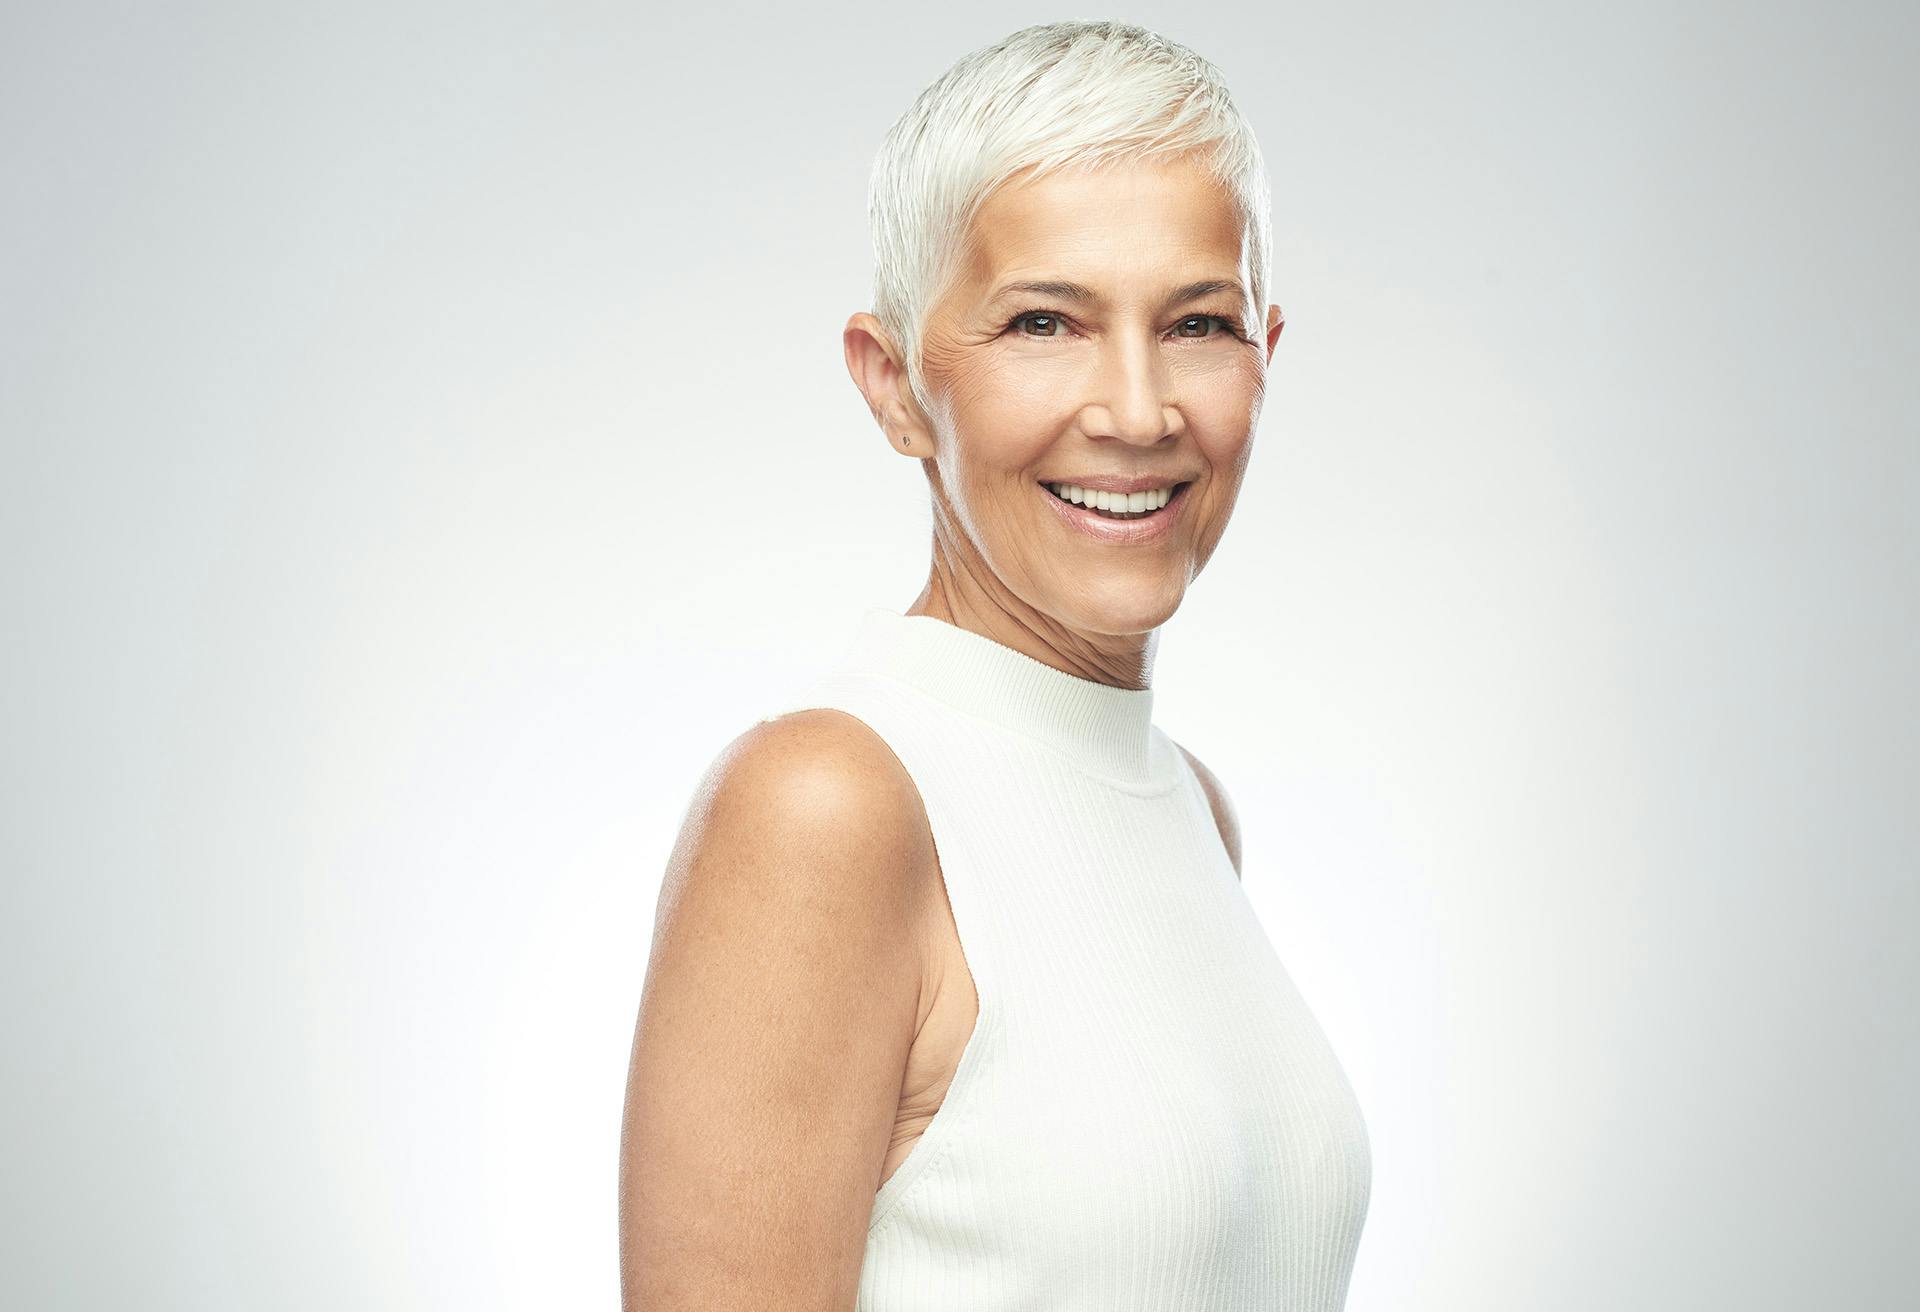 Woman with Short White Hair